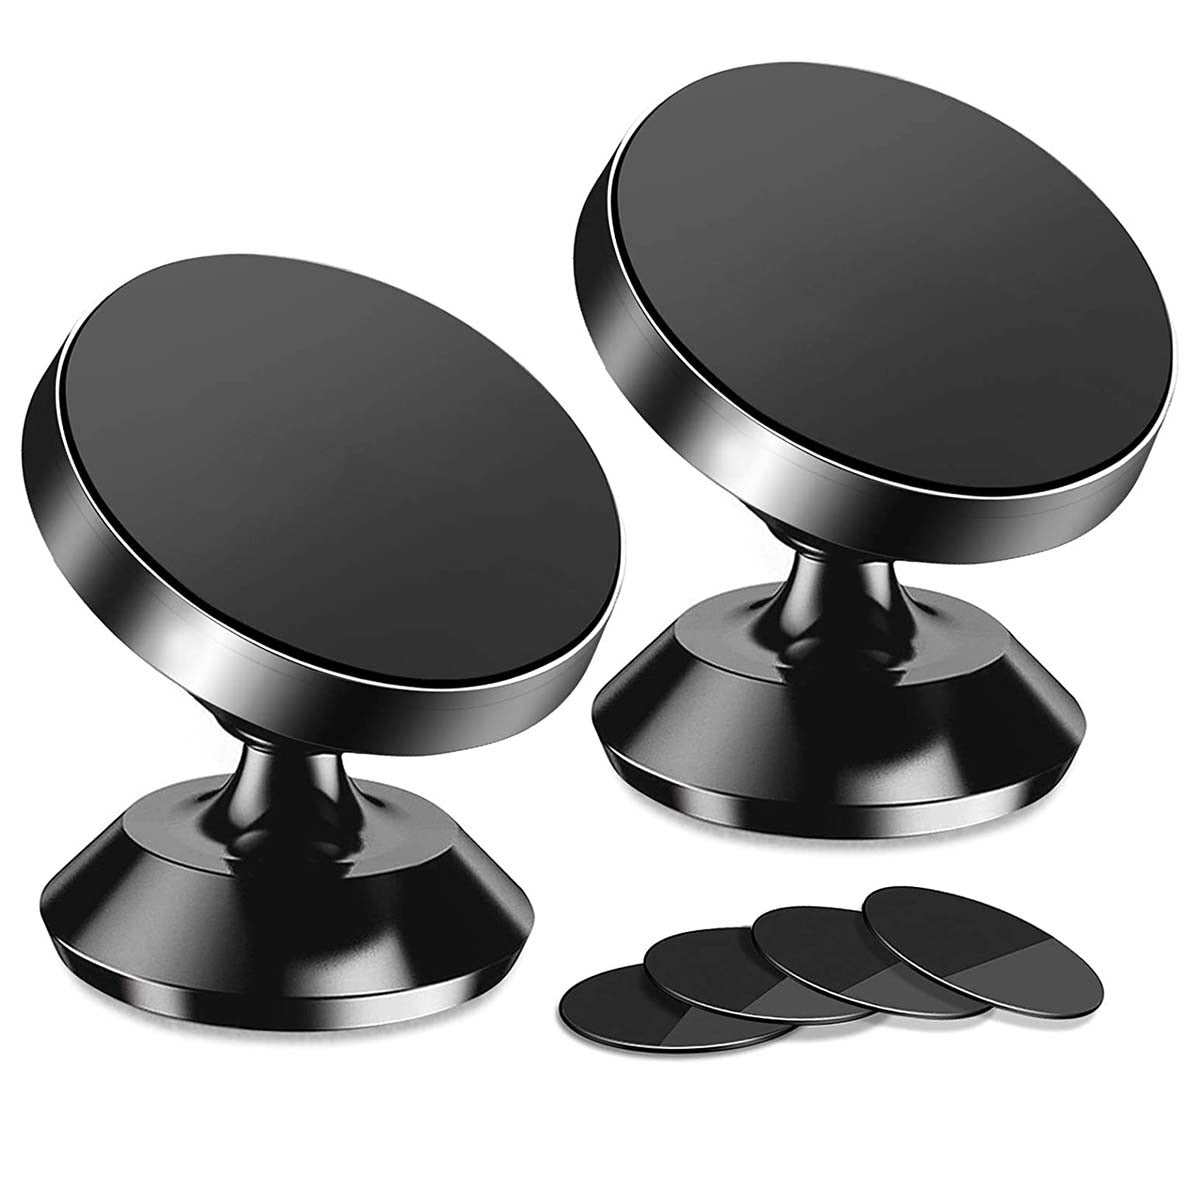 [2 Pack ] Magnetic Phone Mount, Custom For Cars, [ Super Strong Magnet ] [ with 4 Metal Plate ] car Magnetic Phone Holder, [ 360° Rotation ] Universal Dashboard car Mount Fits All Cell Phones, Car Accessories LI13982